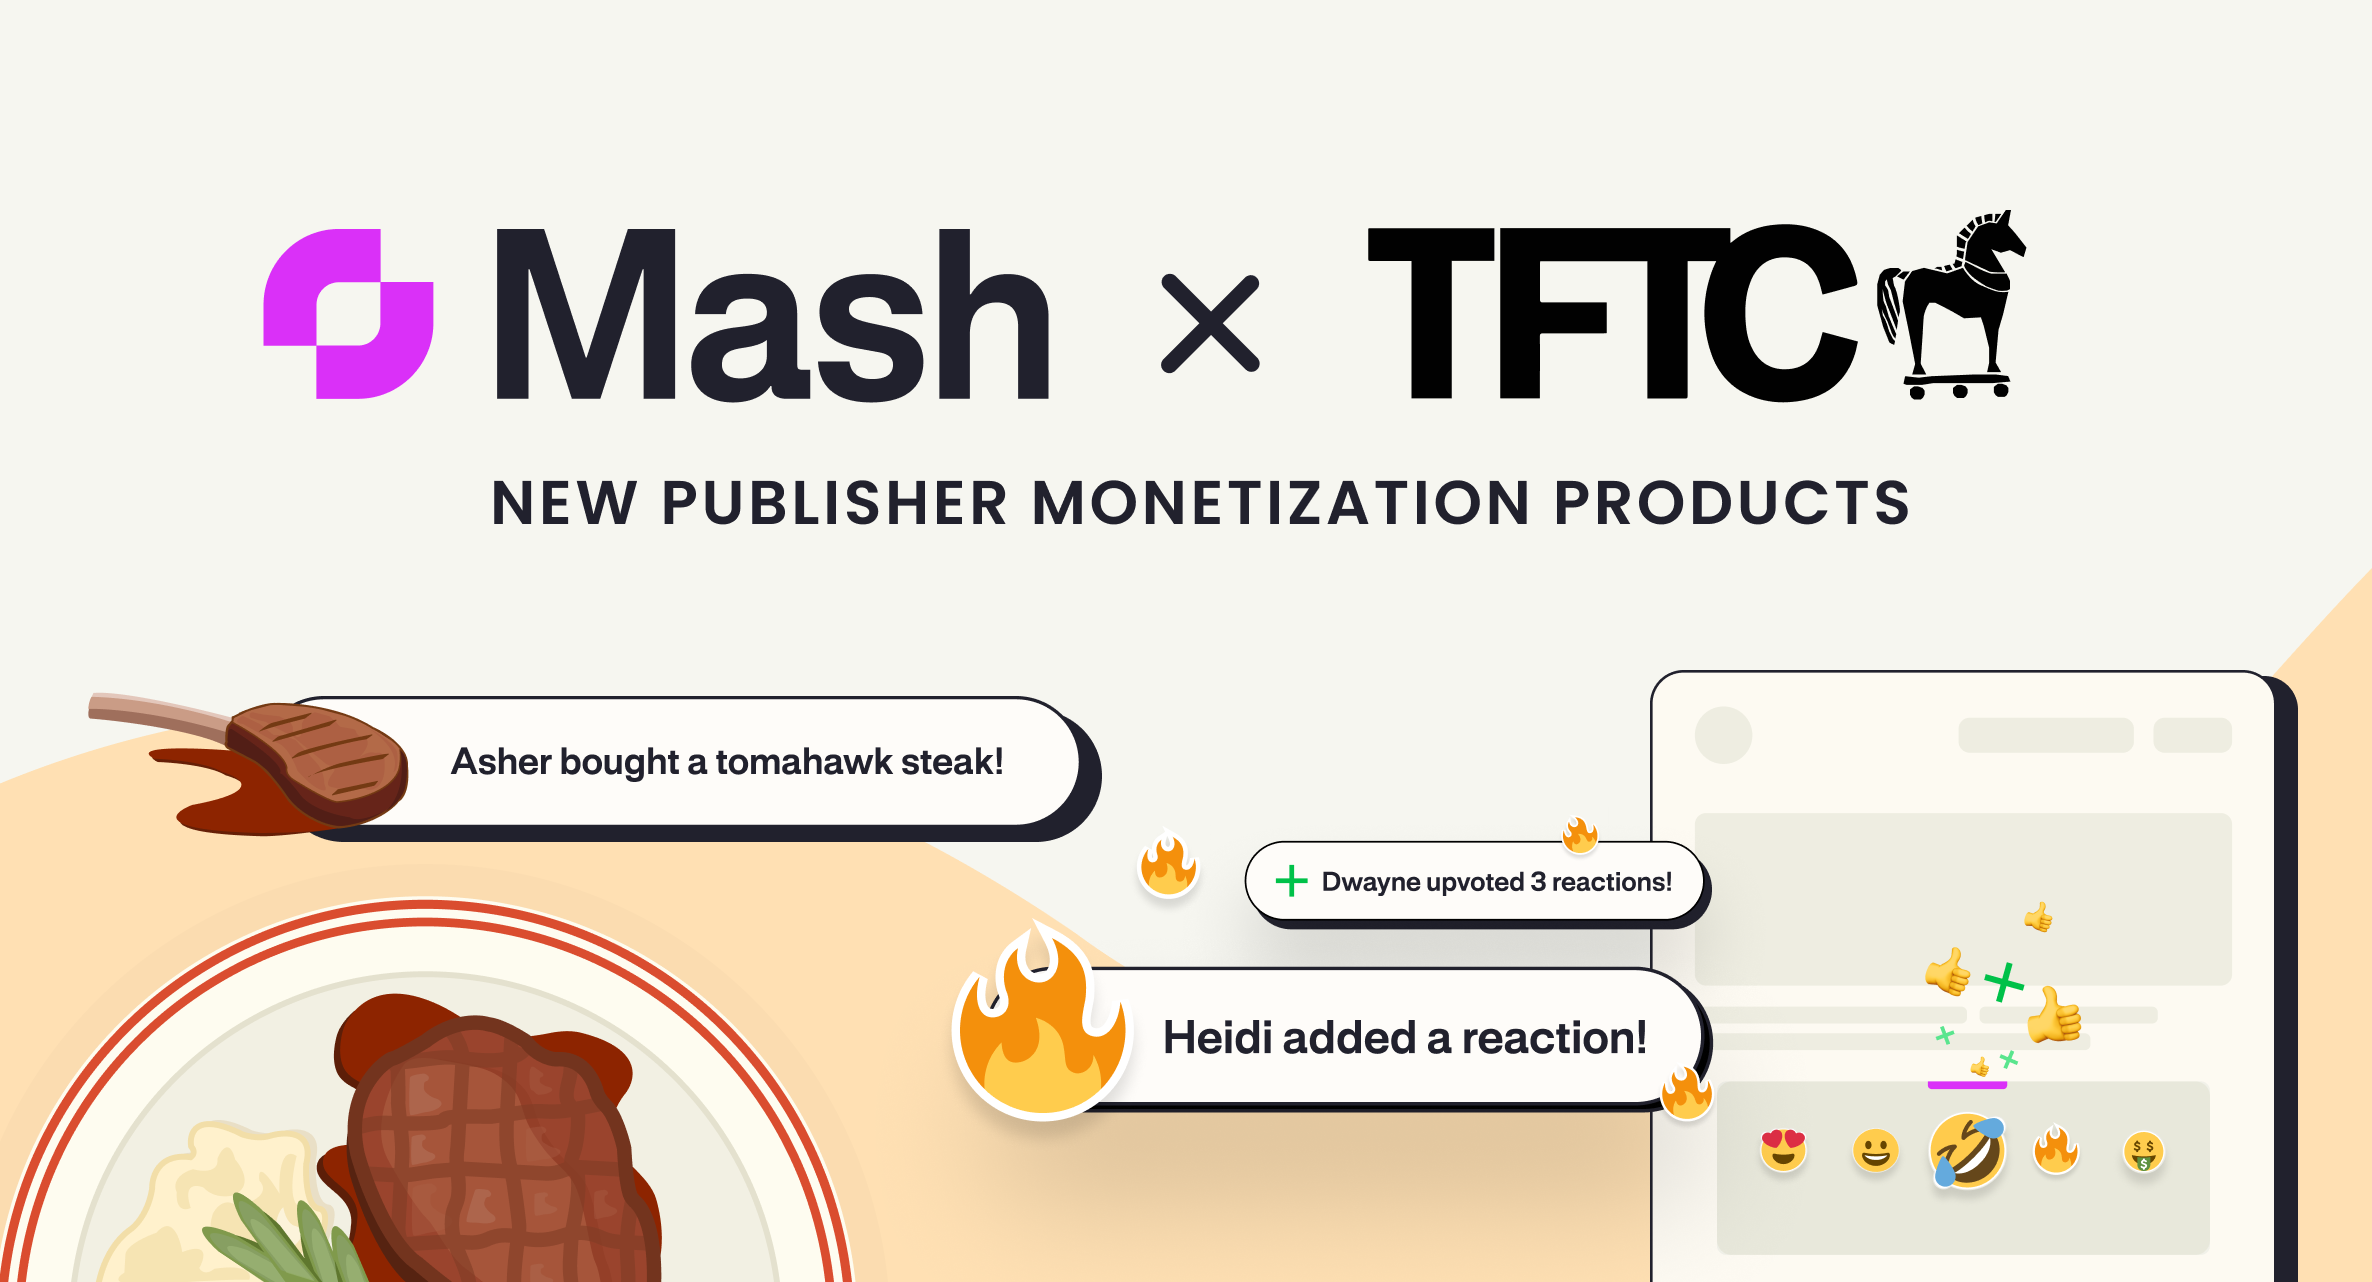 Mash and TFTC & partner to launch new publisher monetization products including on-page user reactions – powered with Bitcoin & the Lightning Network. cover